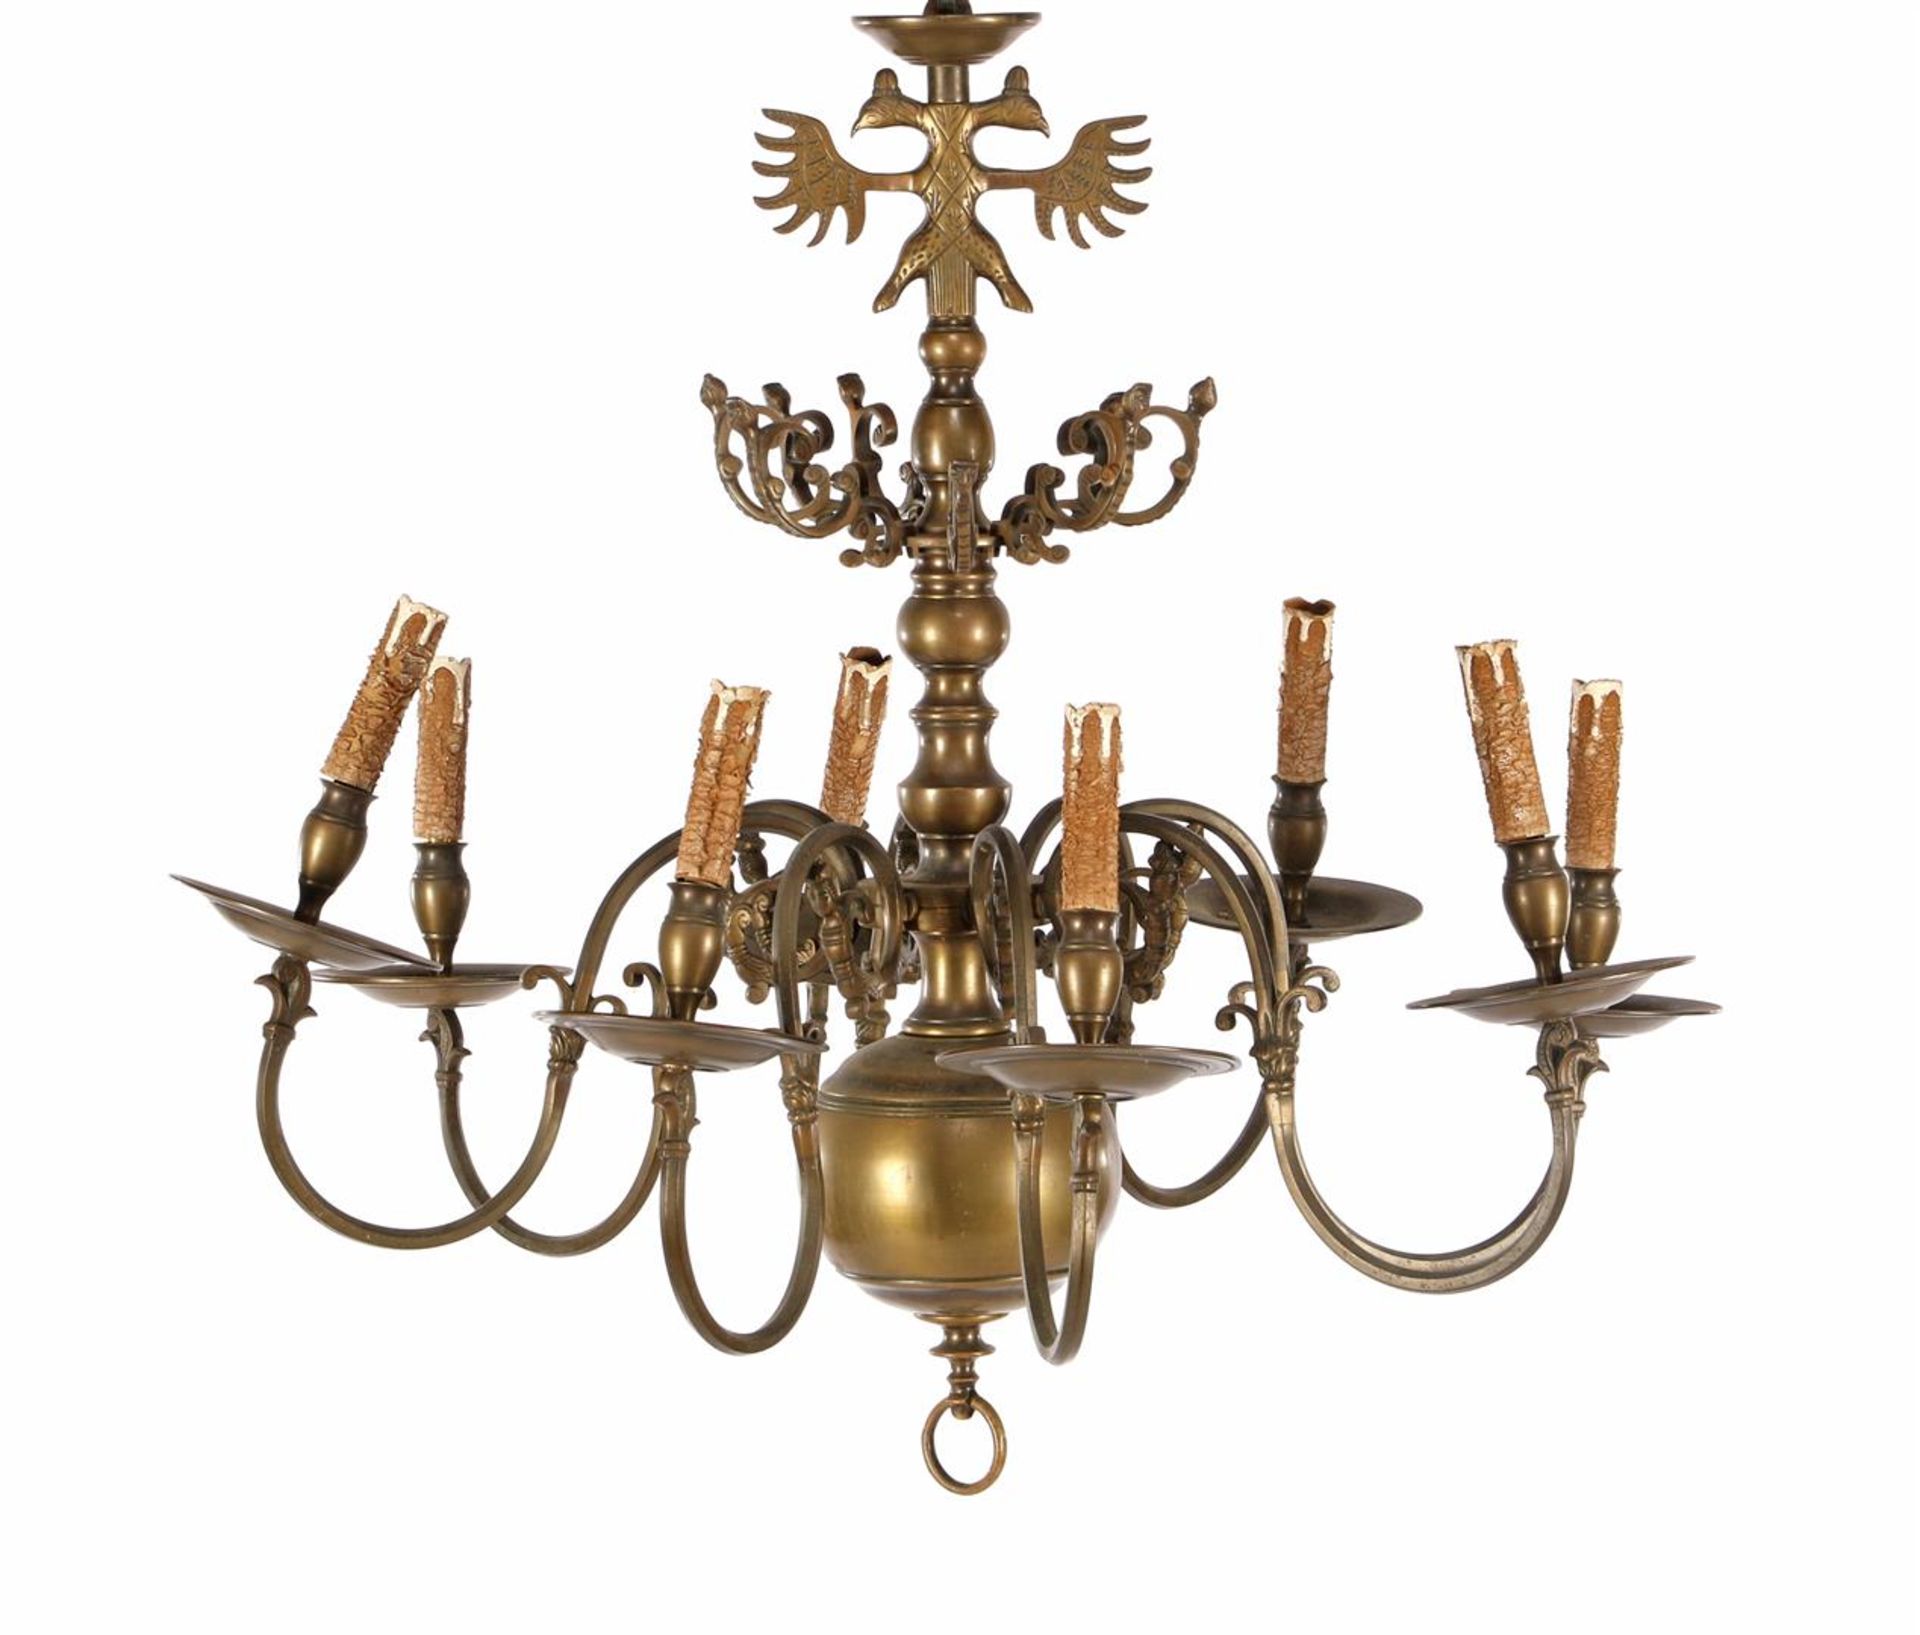 Bronze 8-light globe chandelier with double eagle on top